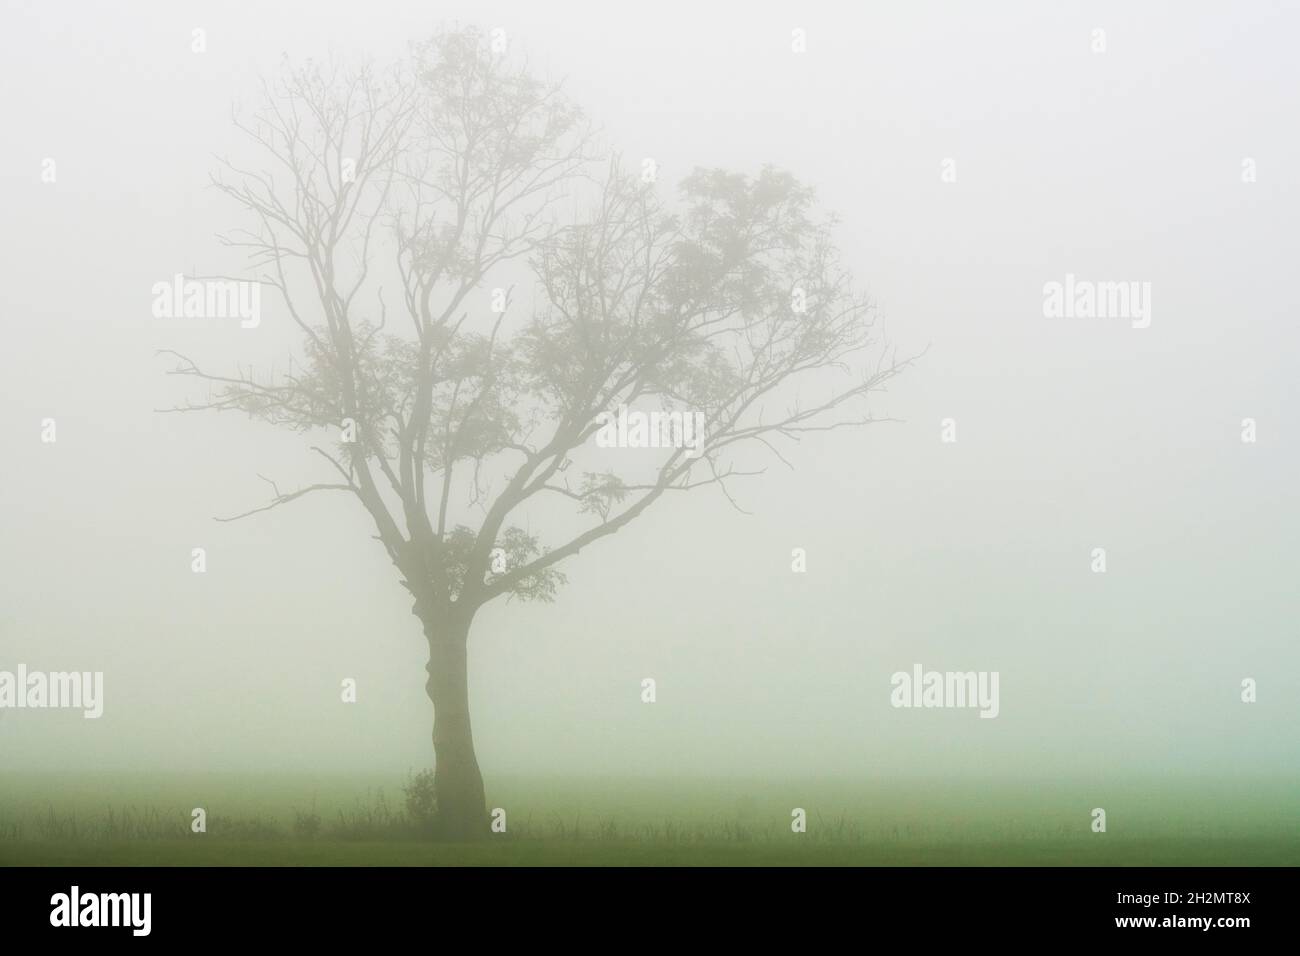 Silhouette of a lonely tree on a misty morning Stock Photo